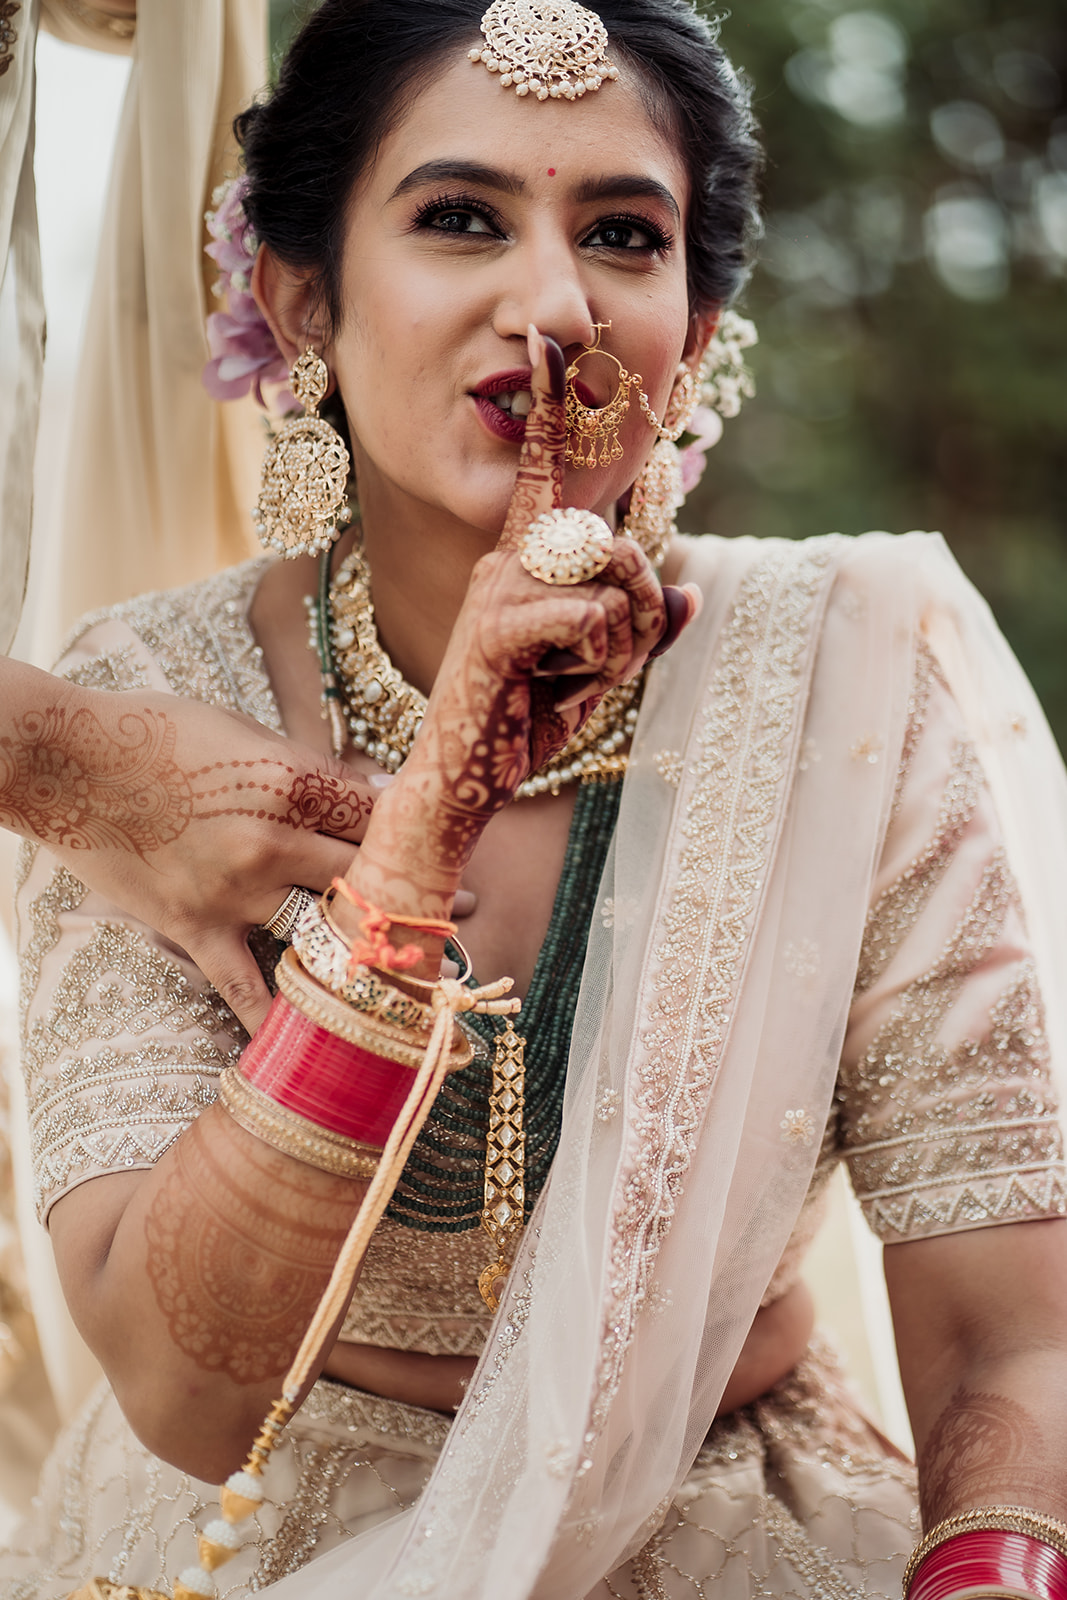 Portrait of elegance: The bride stands as a vision of grace and poise in this beautifully captured bridal portrait